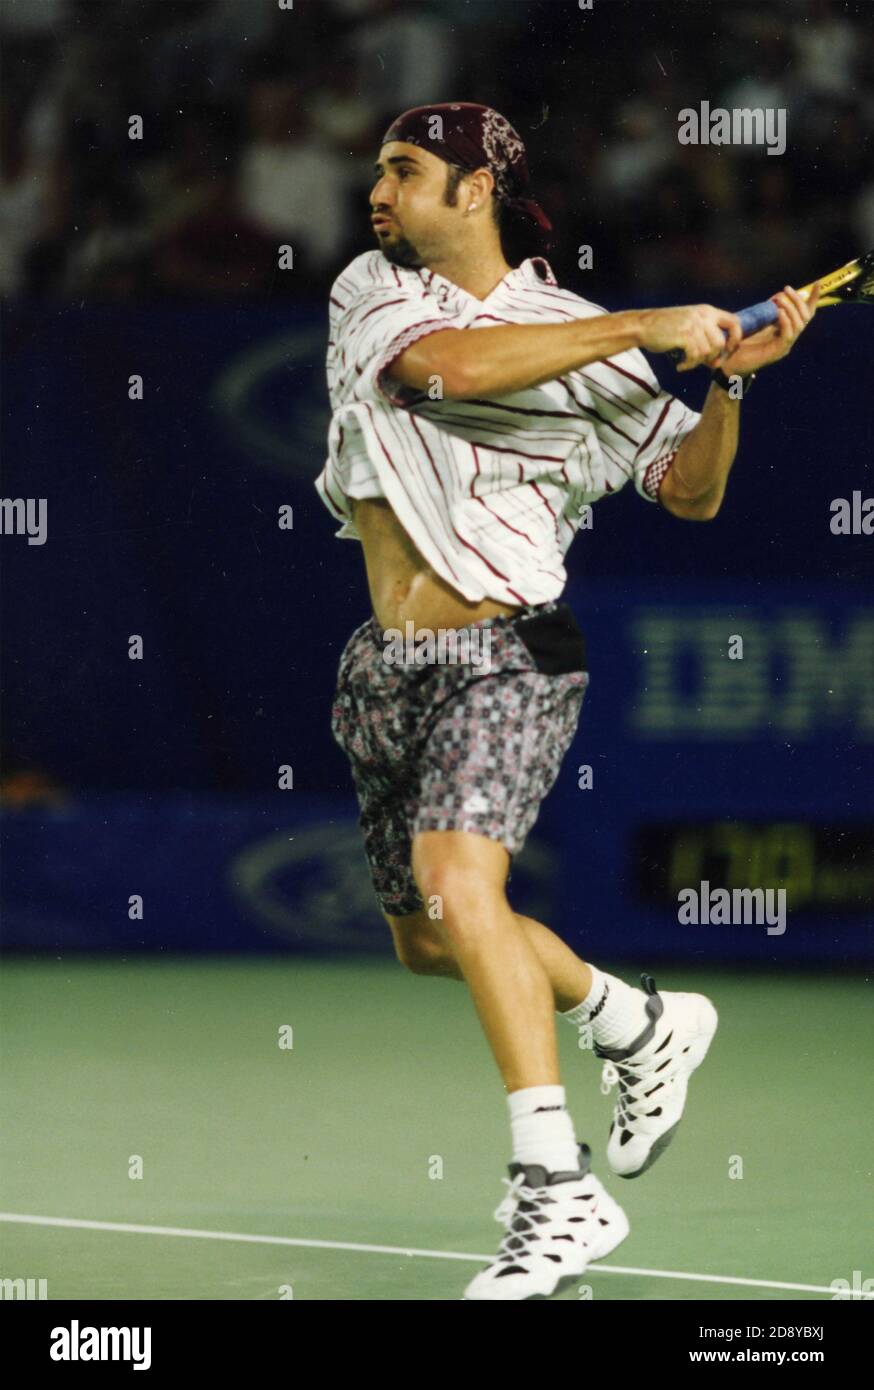 American tennis player Andre Agassi at the Australian Open tournamant, 1995 Stock Photo